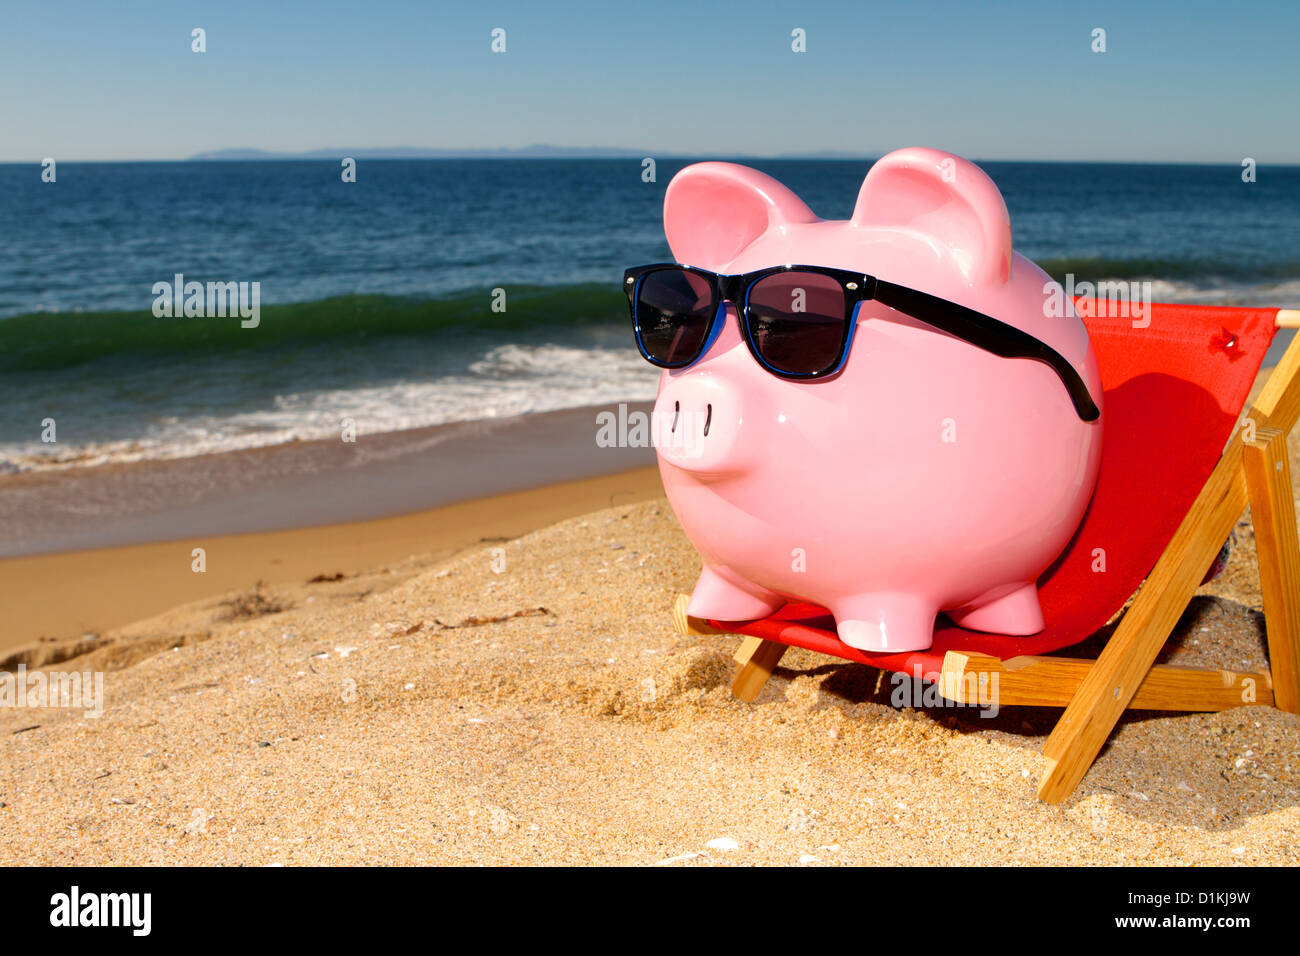 Pink piggy bank on a beach in a deck chair wearing sunglasses with golden sand a blue ocean and vivid blue sky Stock Photo